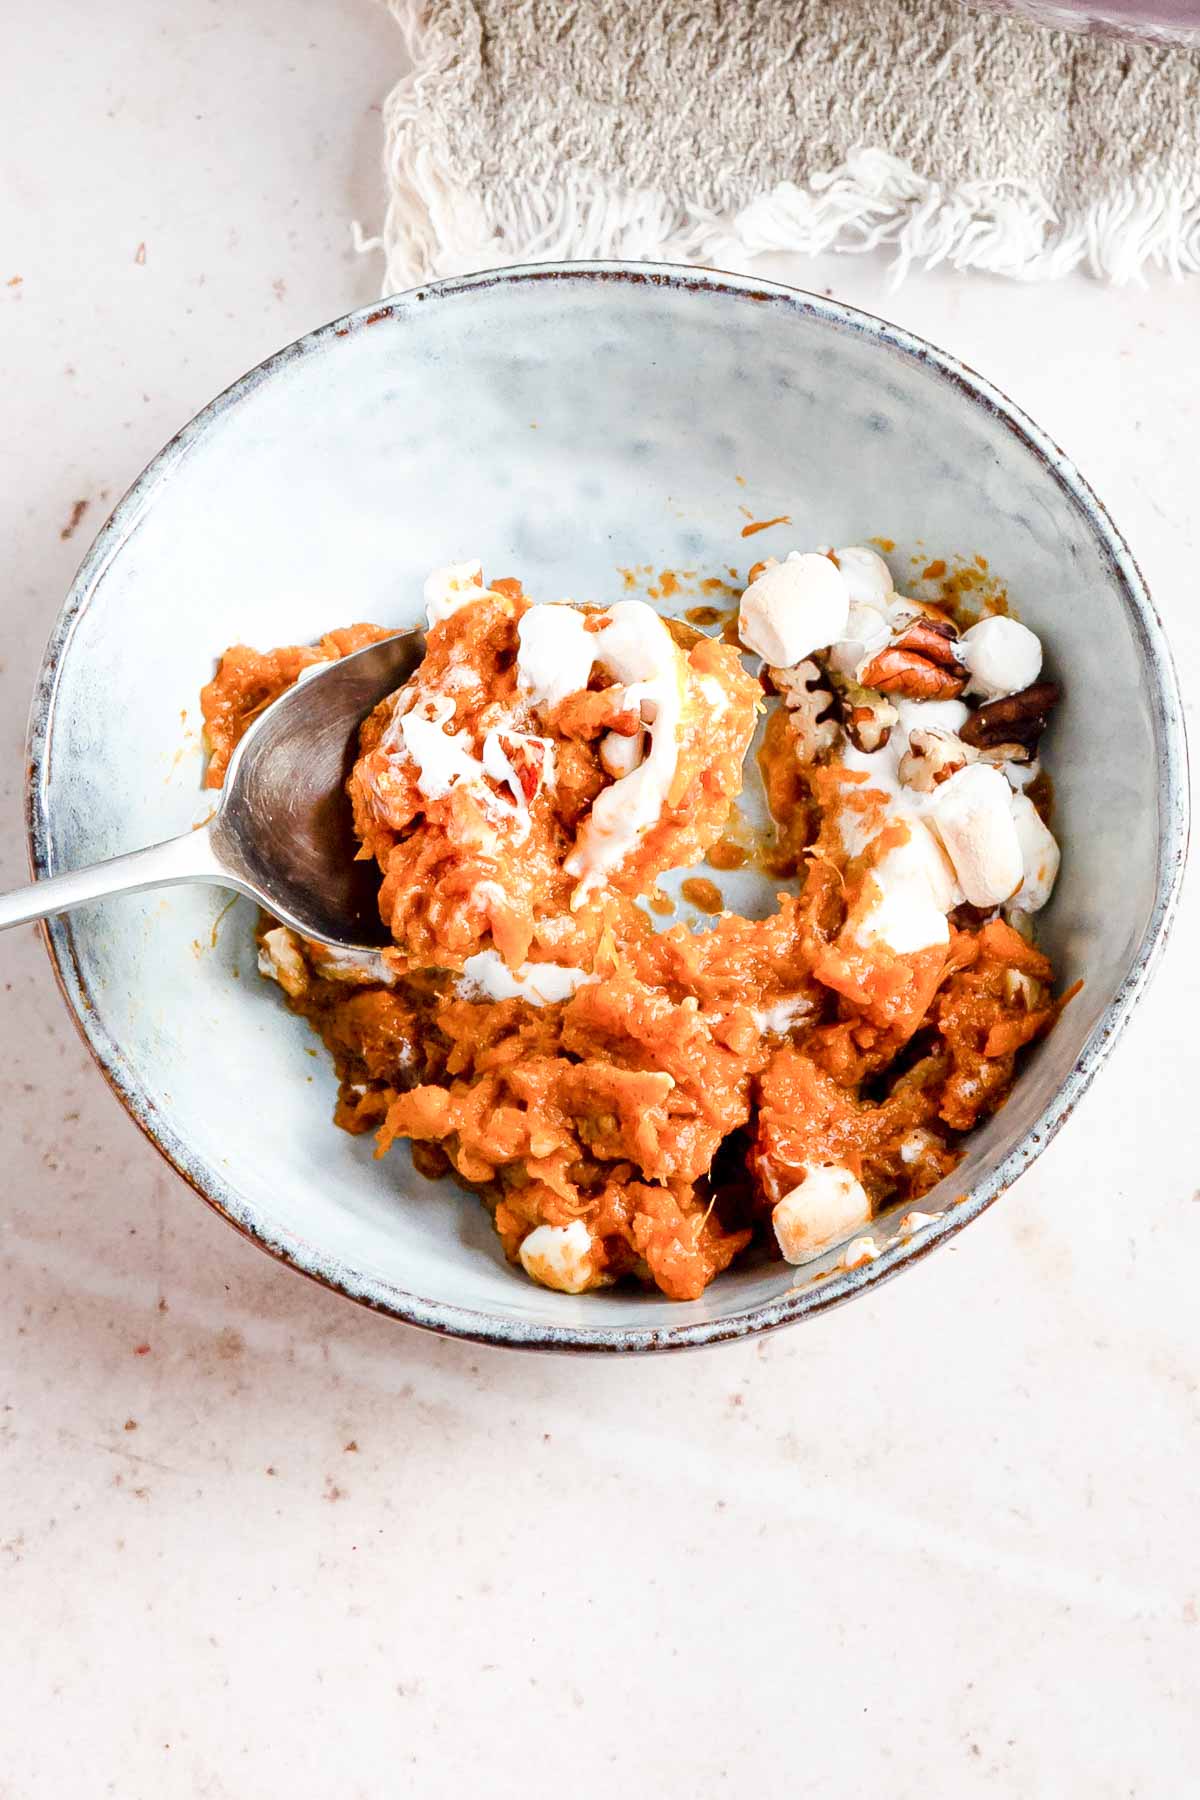 one portion of sweet potato casserole in a ceramic bowl with spoon removing a bite